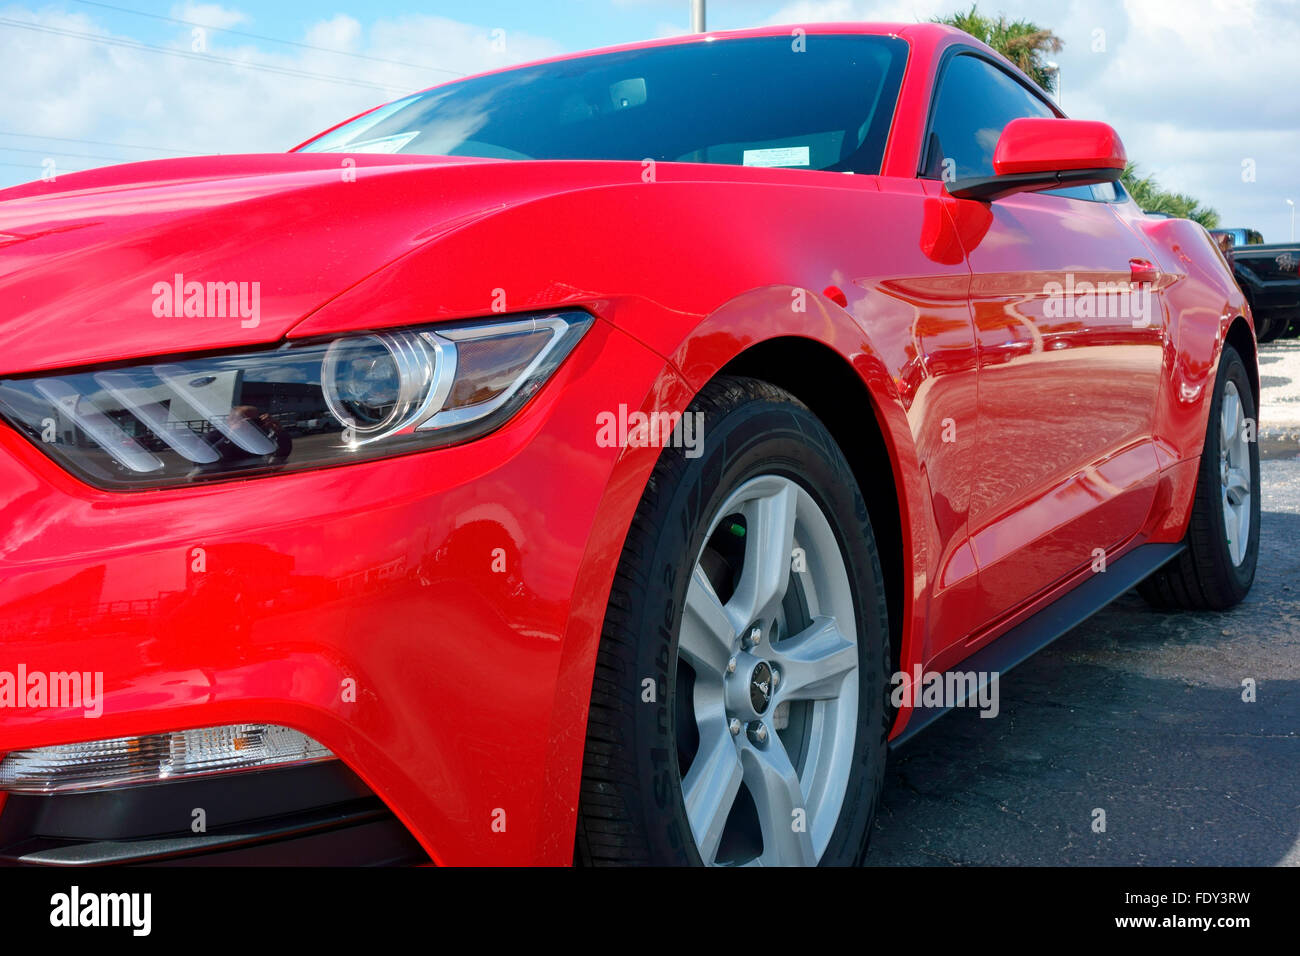 2016 Ford Mustang muscle car automobile in red color Stock Photo